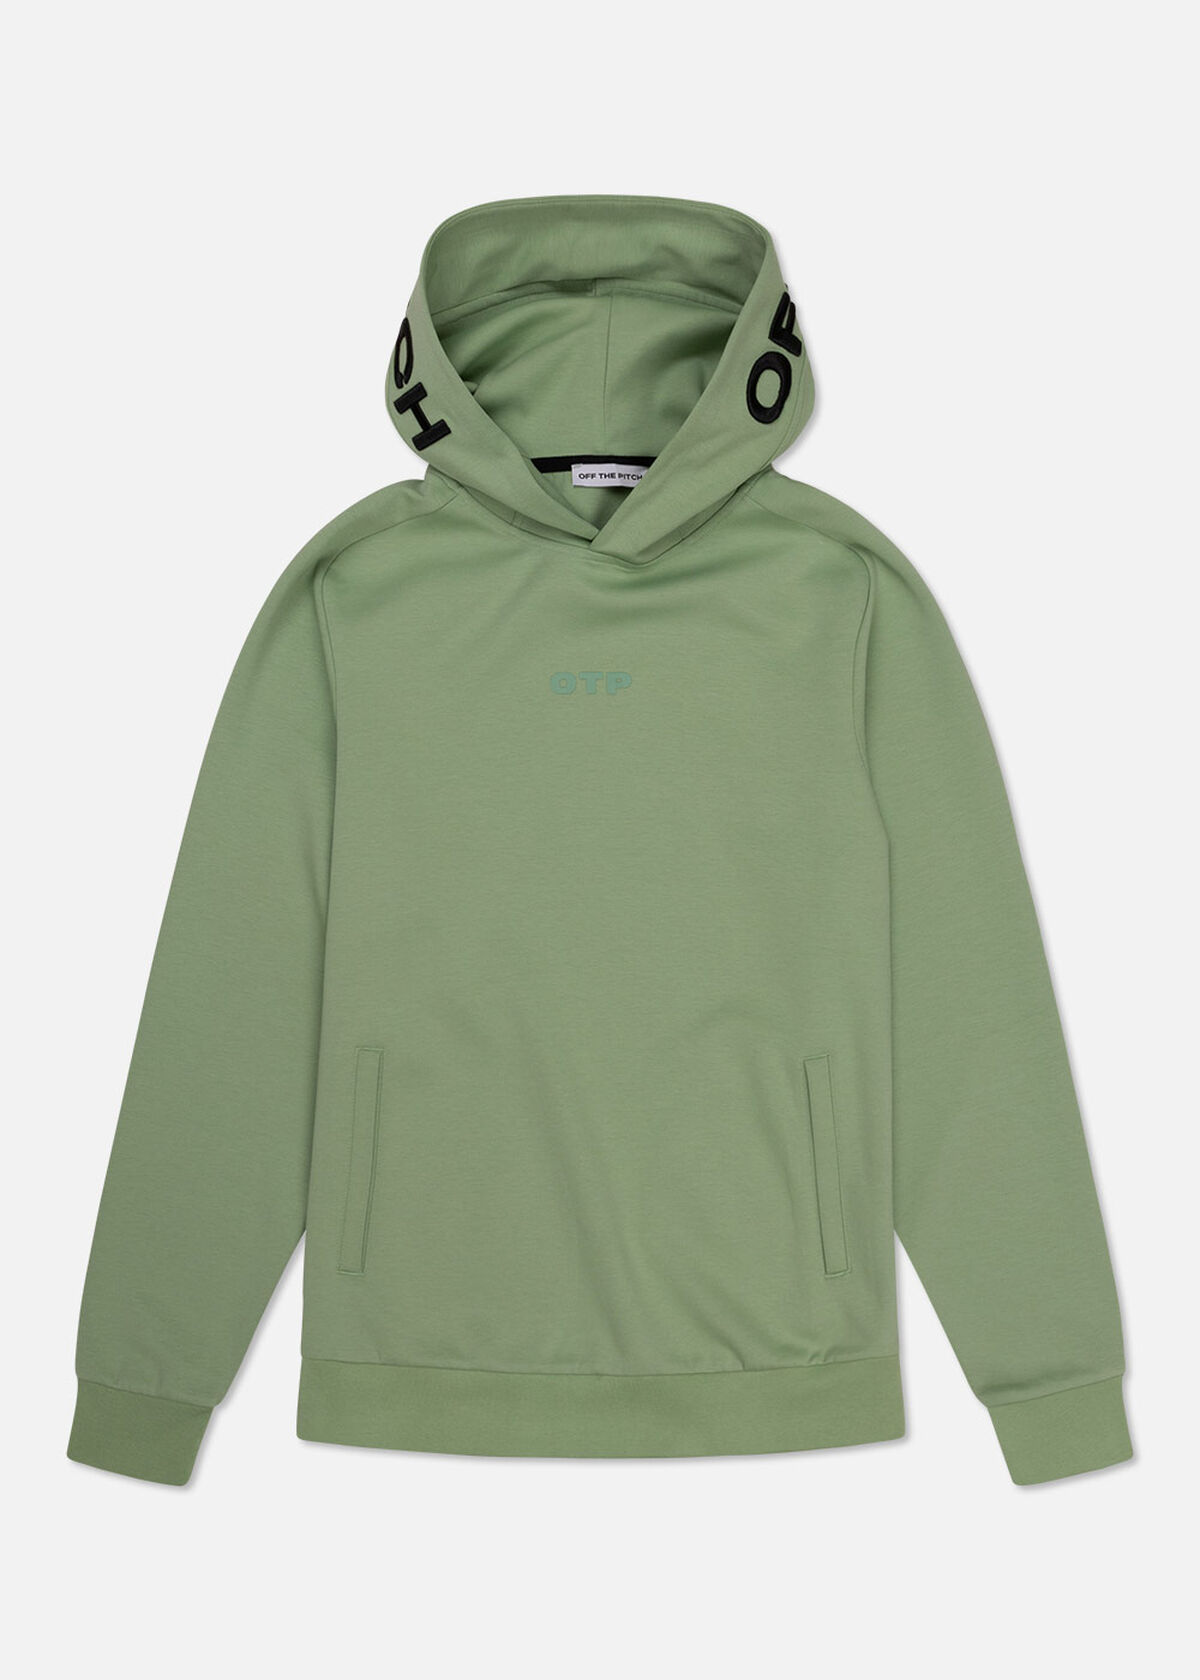 Private Pitch Hood - 75% Cotton / 20% Polyester / , Green/White, hi-res